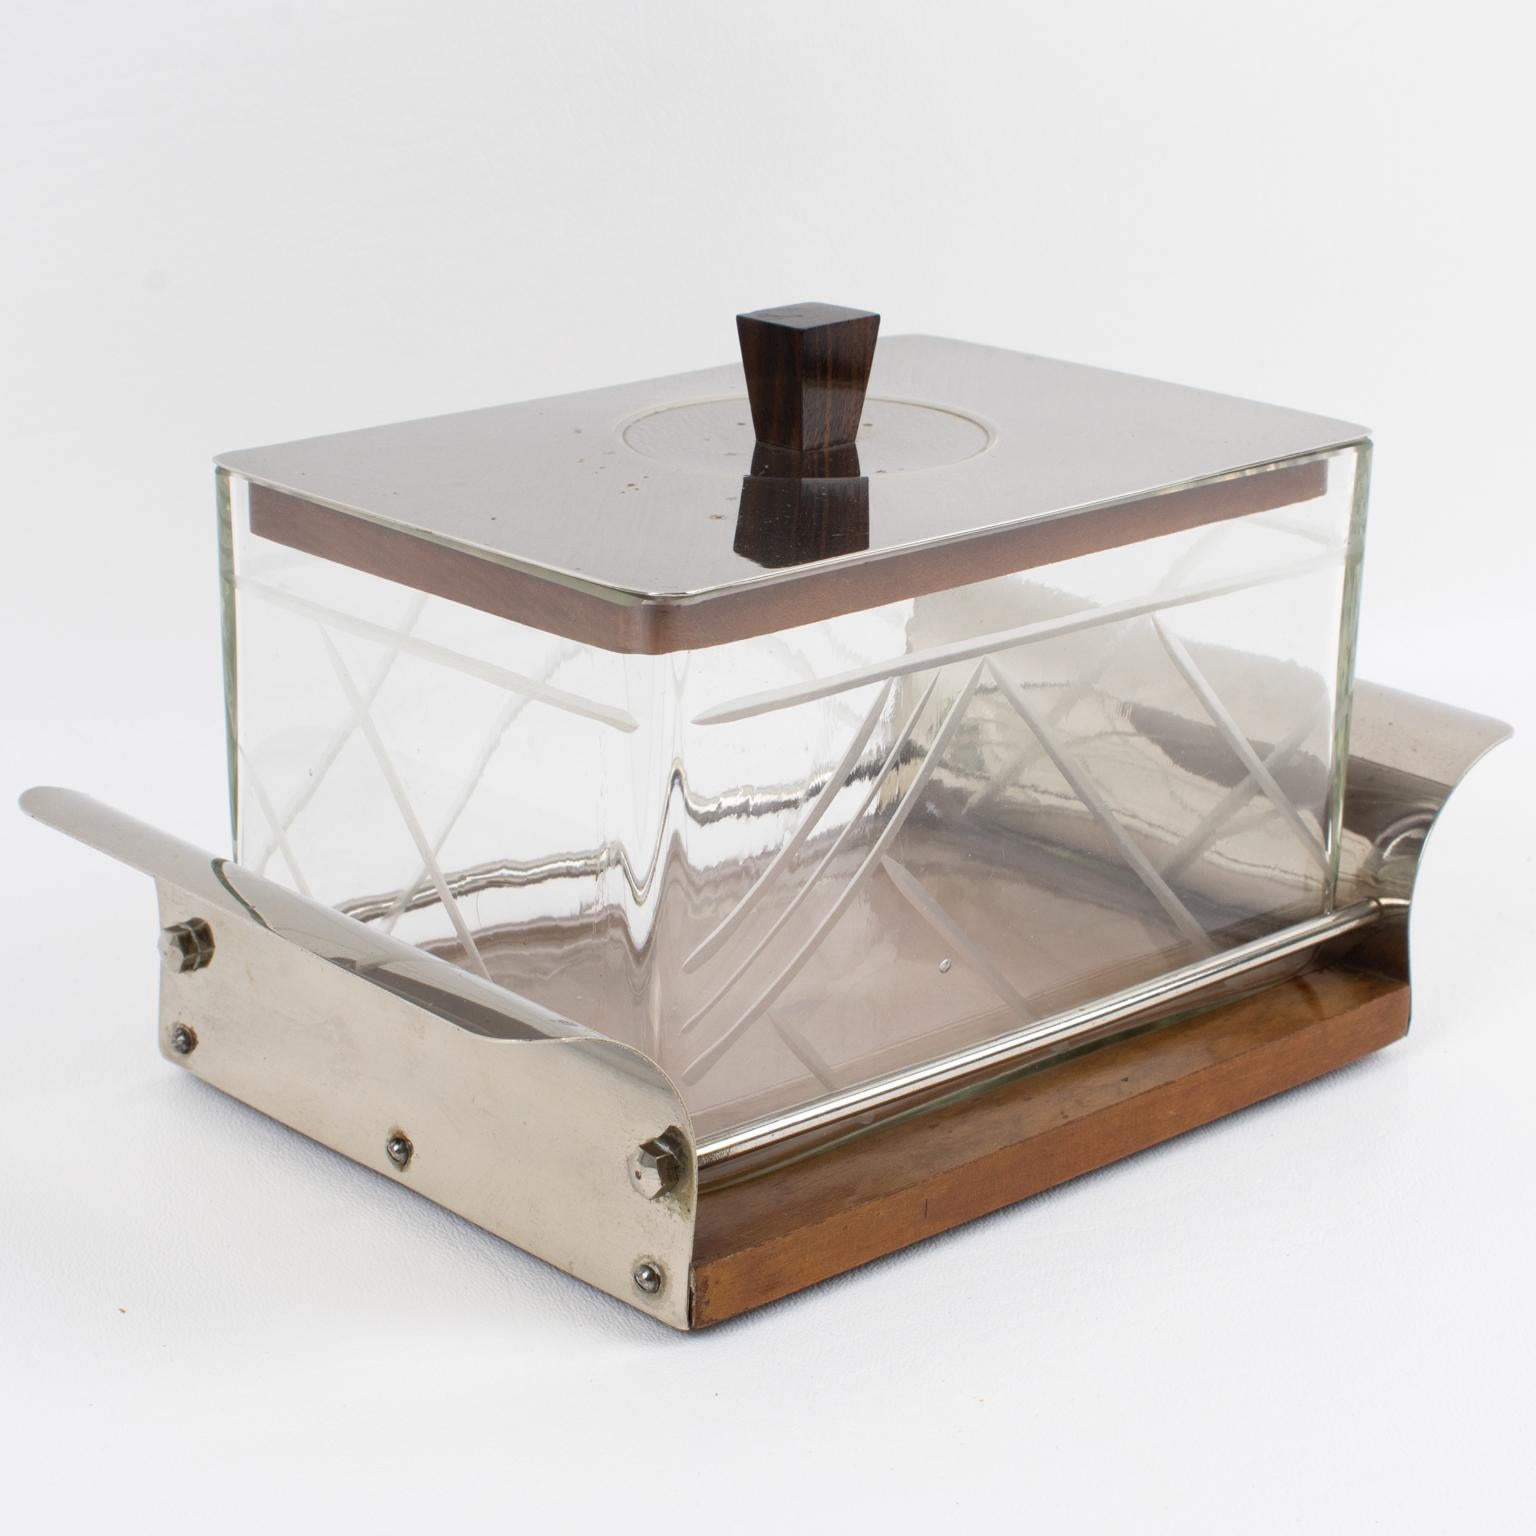 This refined Art Deco decorative cookie box or candy jar has a serving bowl insert and was crafted in France in the 1930s. The modernist design boasts a chromed metal and wood holder base with raised handles. The crystal cut insert bowl has large